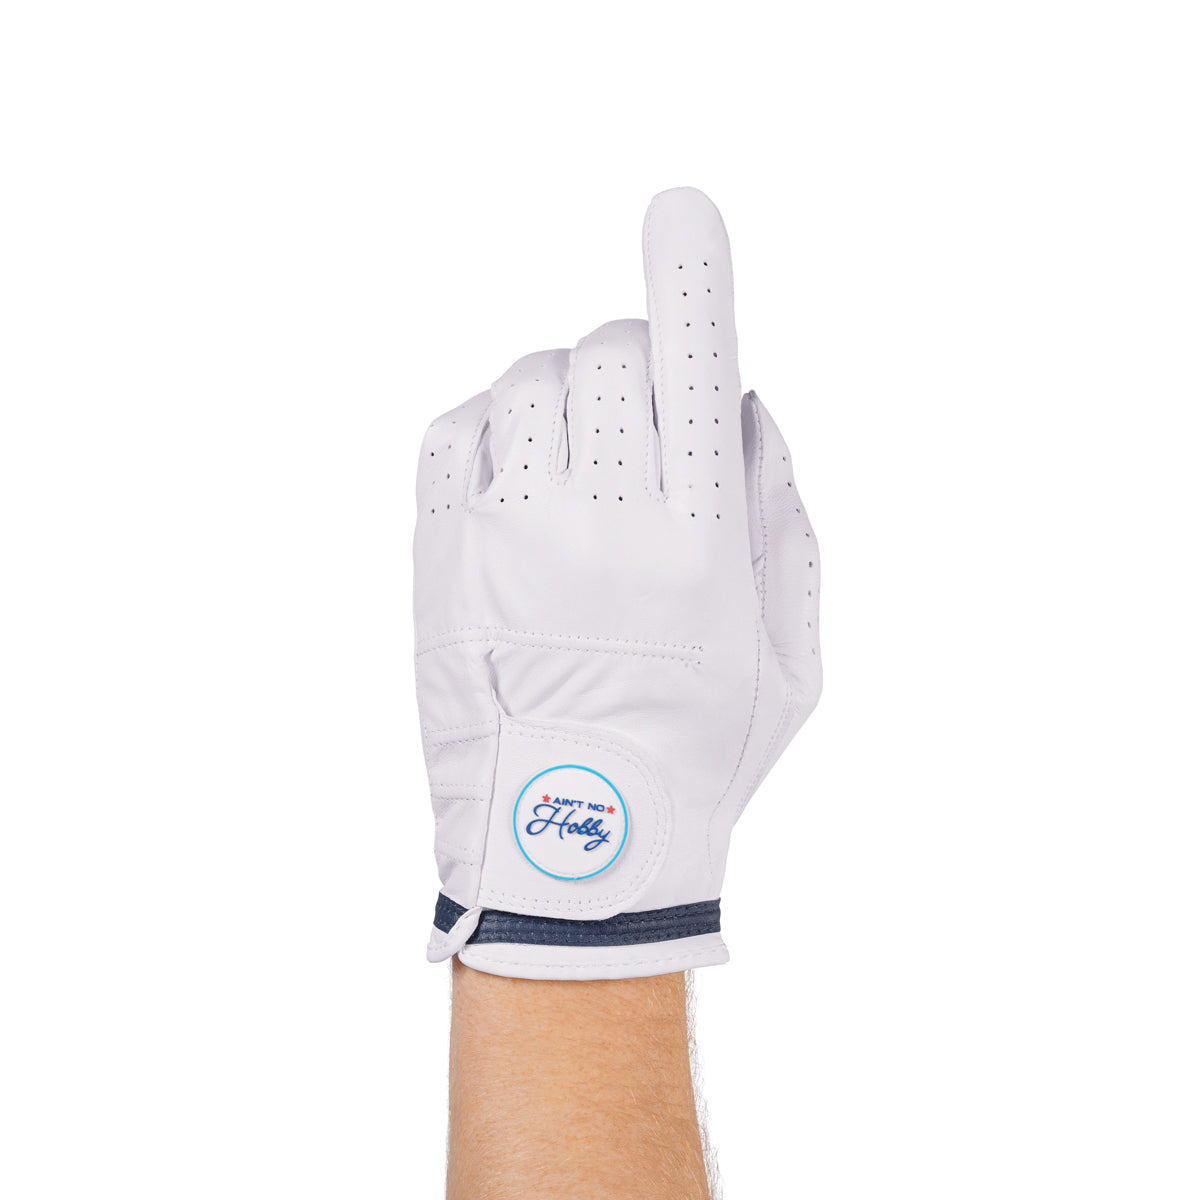 Barstool Golf Ain't No Hobby Golf Glove-Golf Accessories-Fore Play-Barstool Sports